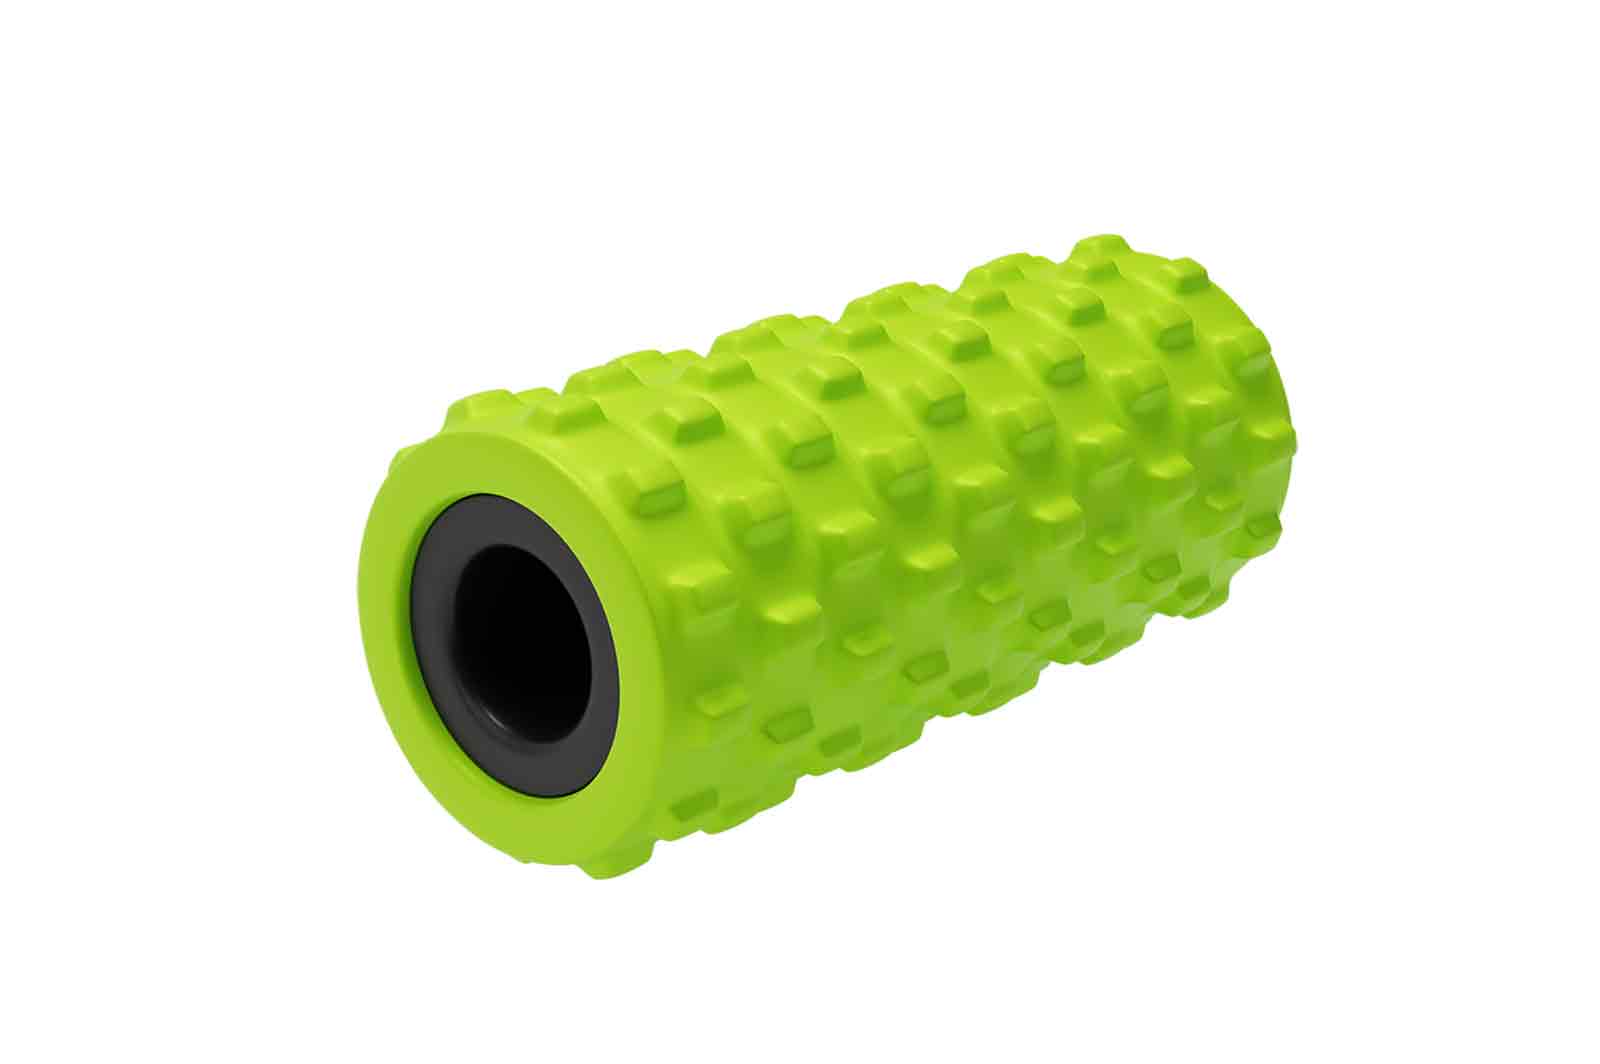 Grid foam roller for workout 3d rendered illustration. Roll equipment for training, aerobics, sports exercises or fitness